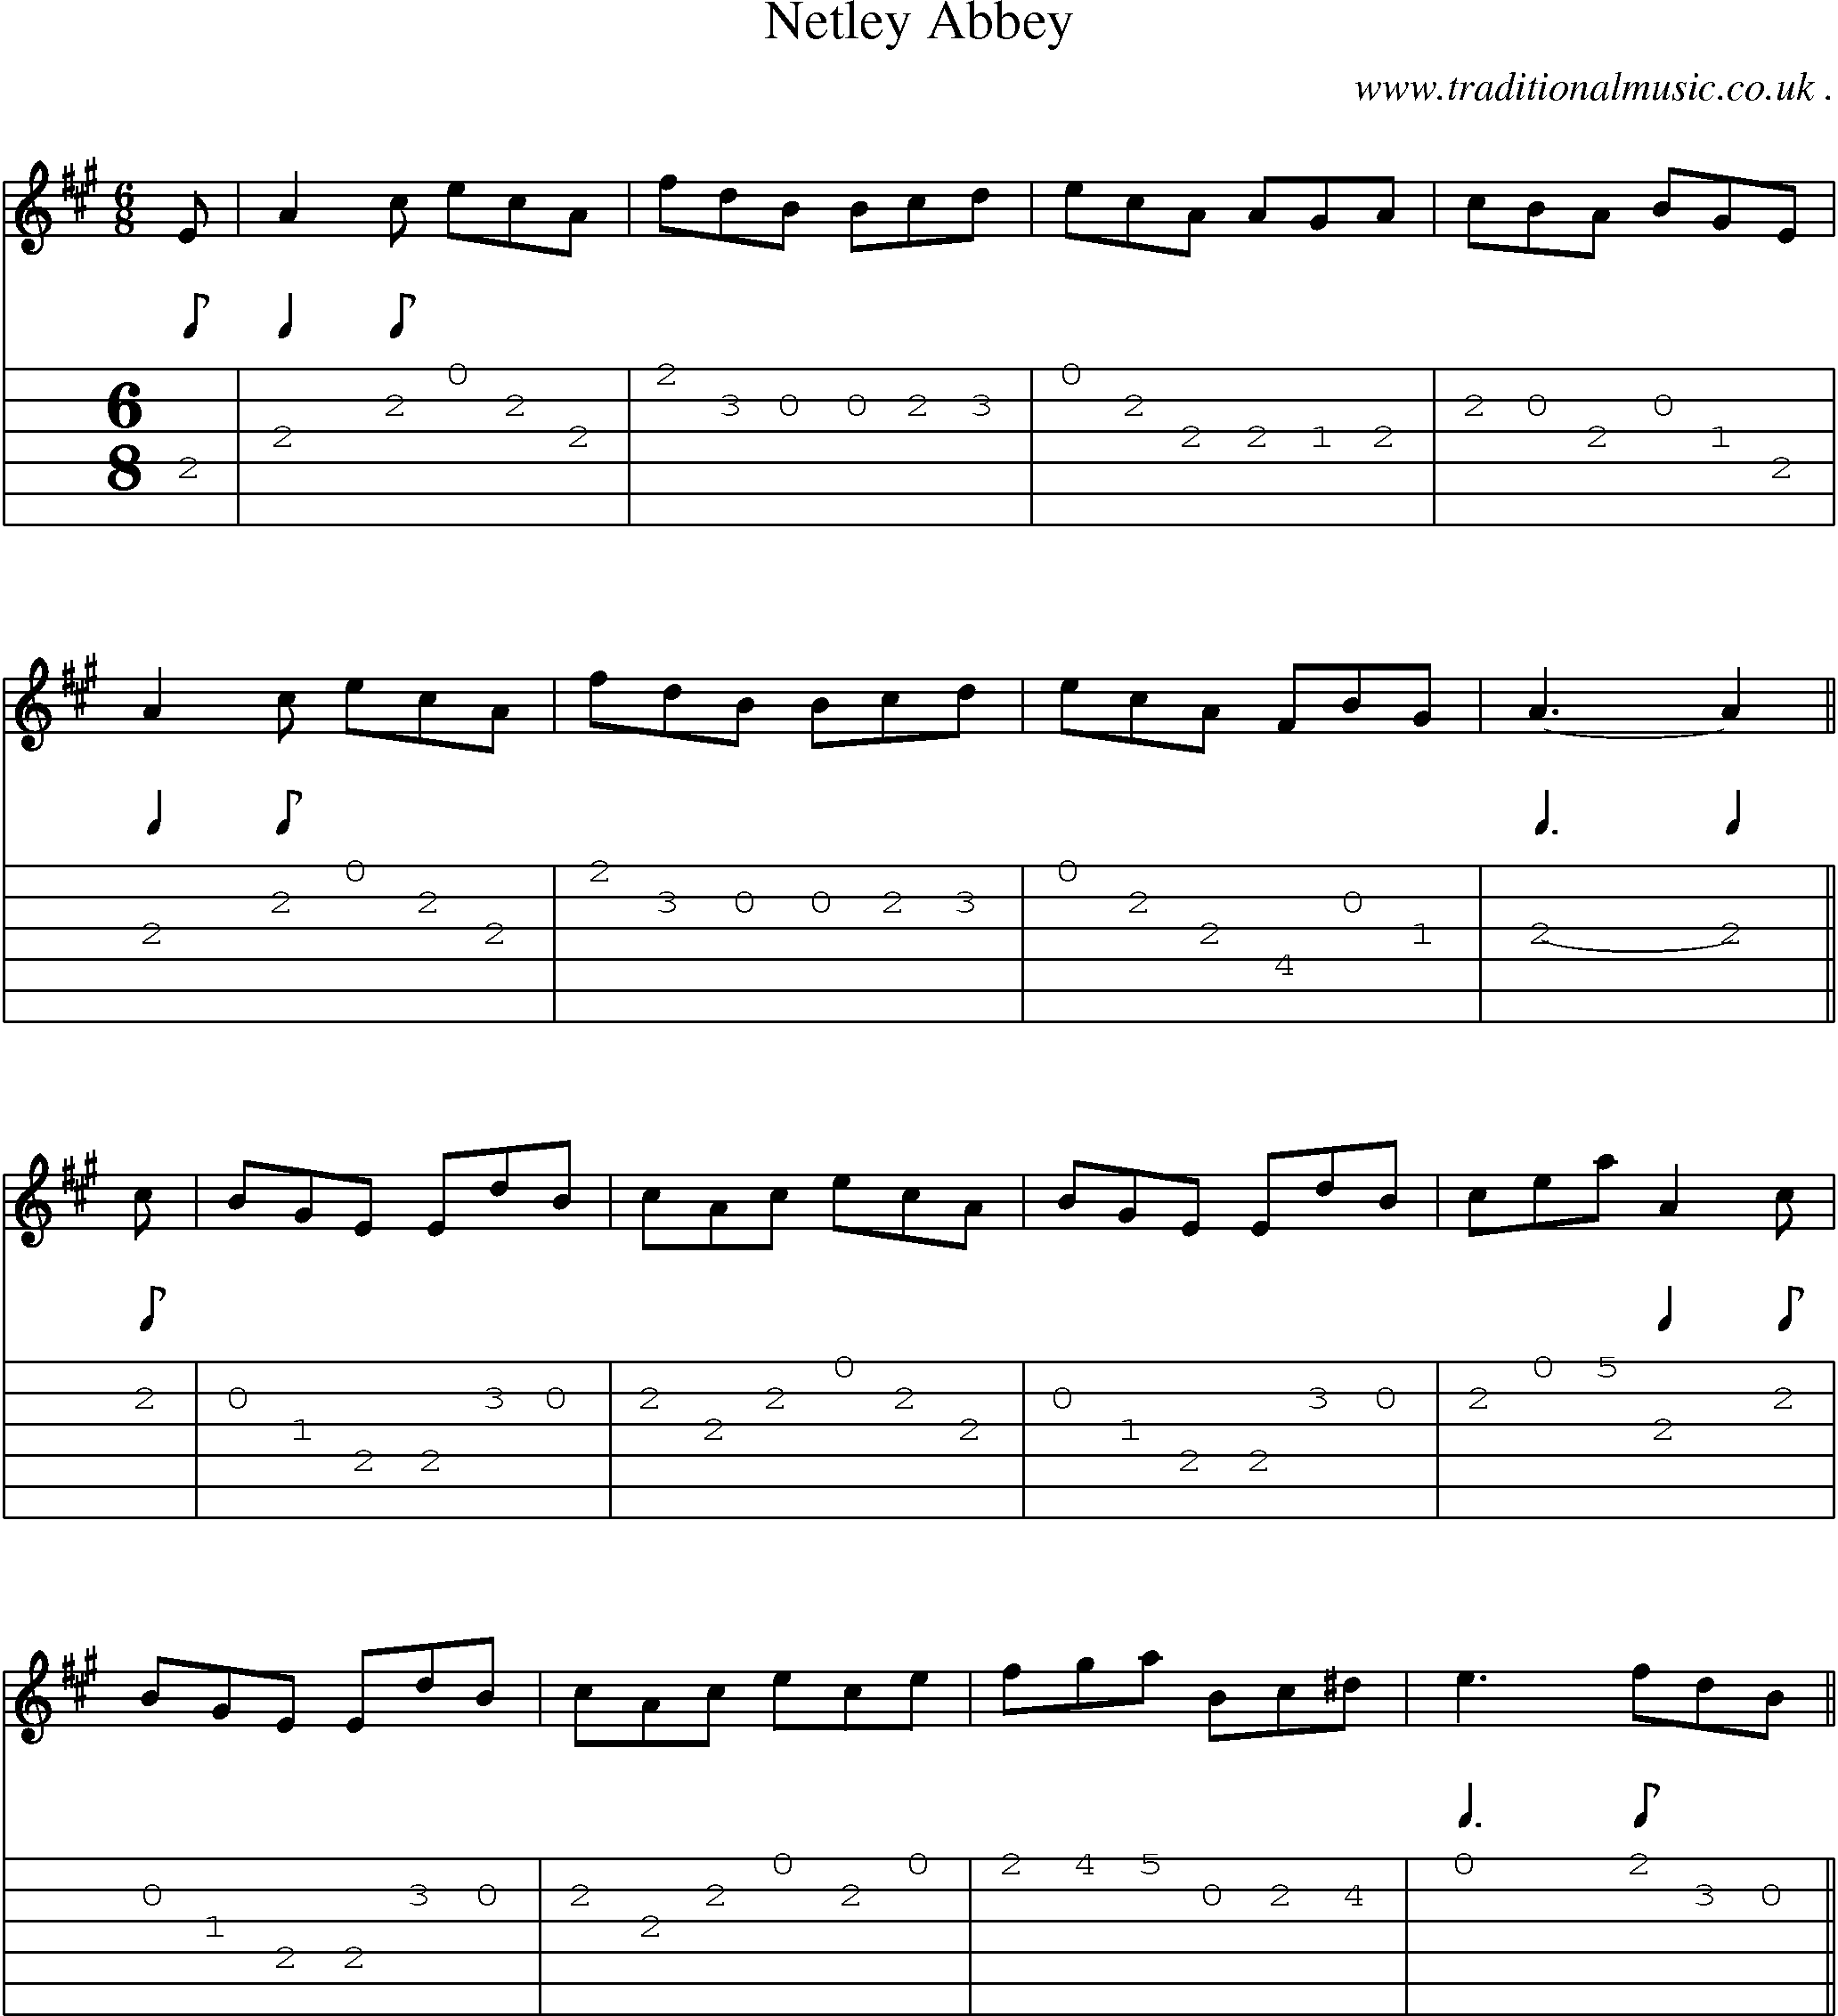 Sheet-Music and Guitar Tabs for Netley Abbey